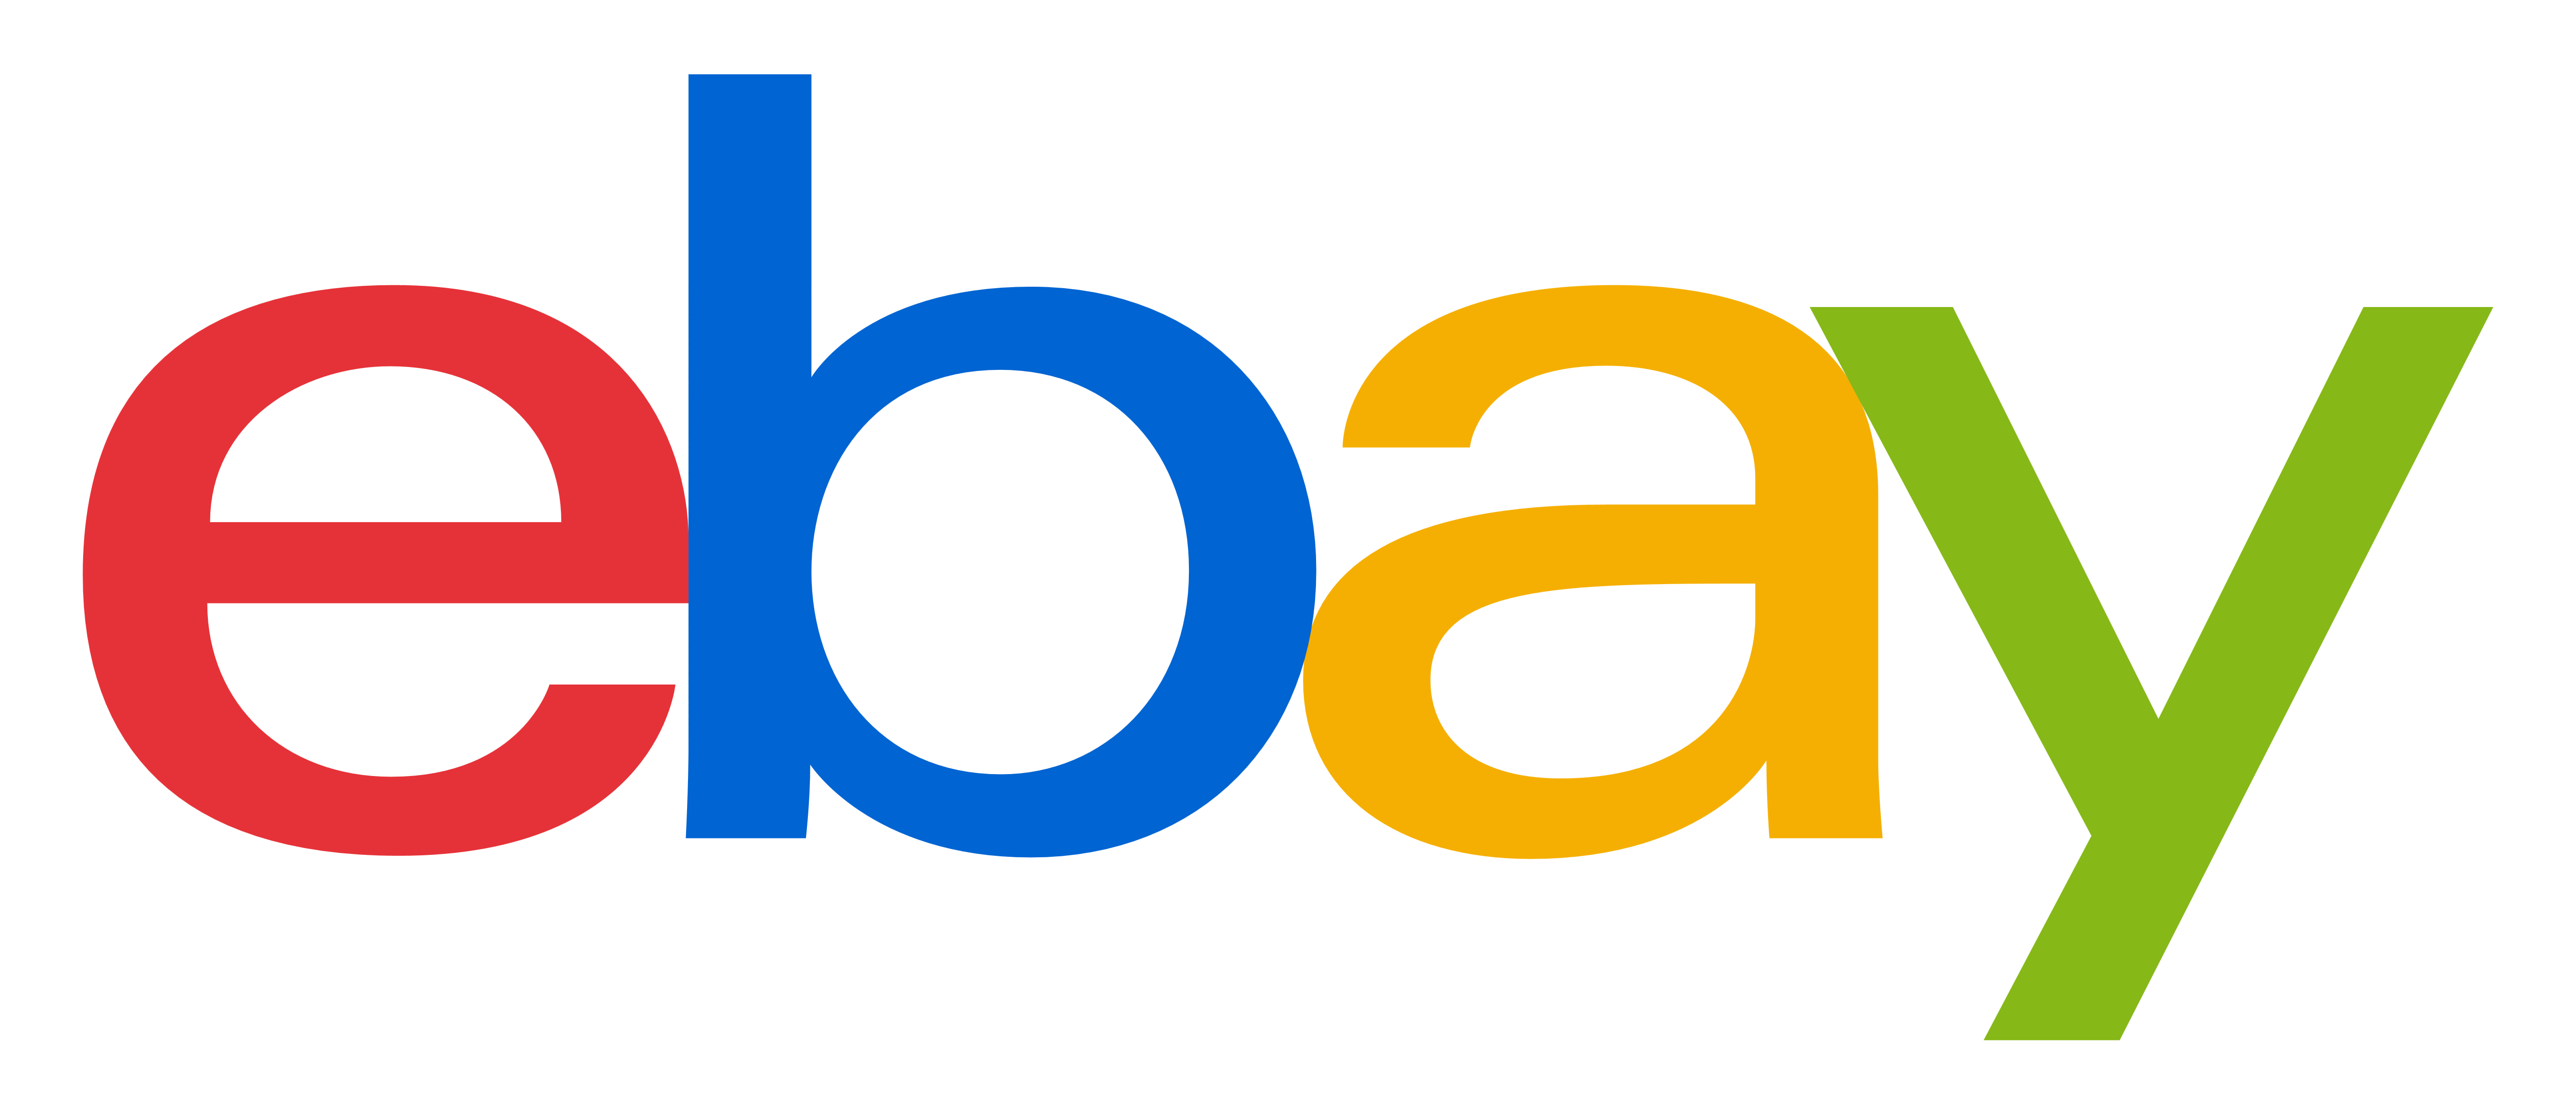 current-ebay-logo-with-new